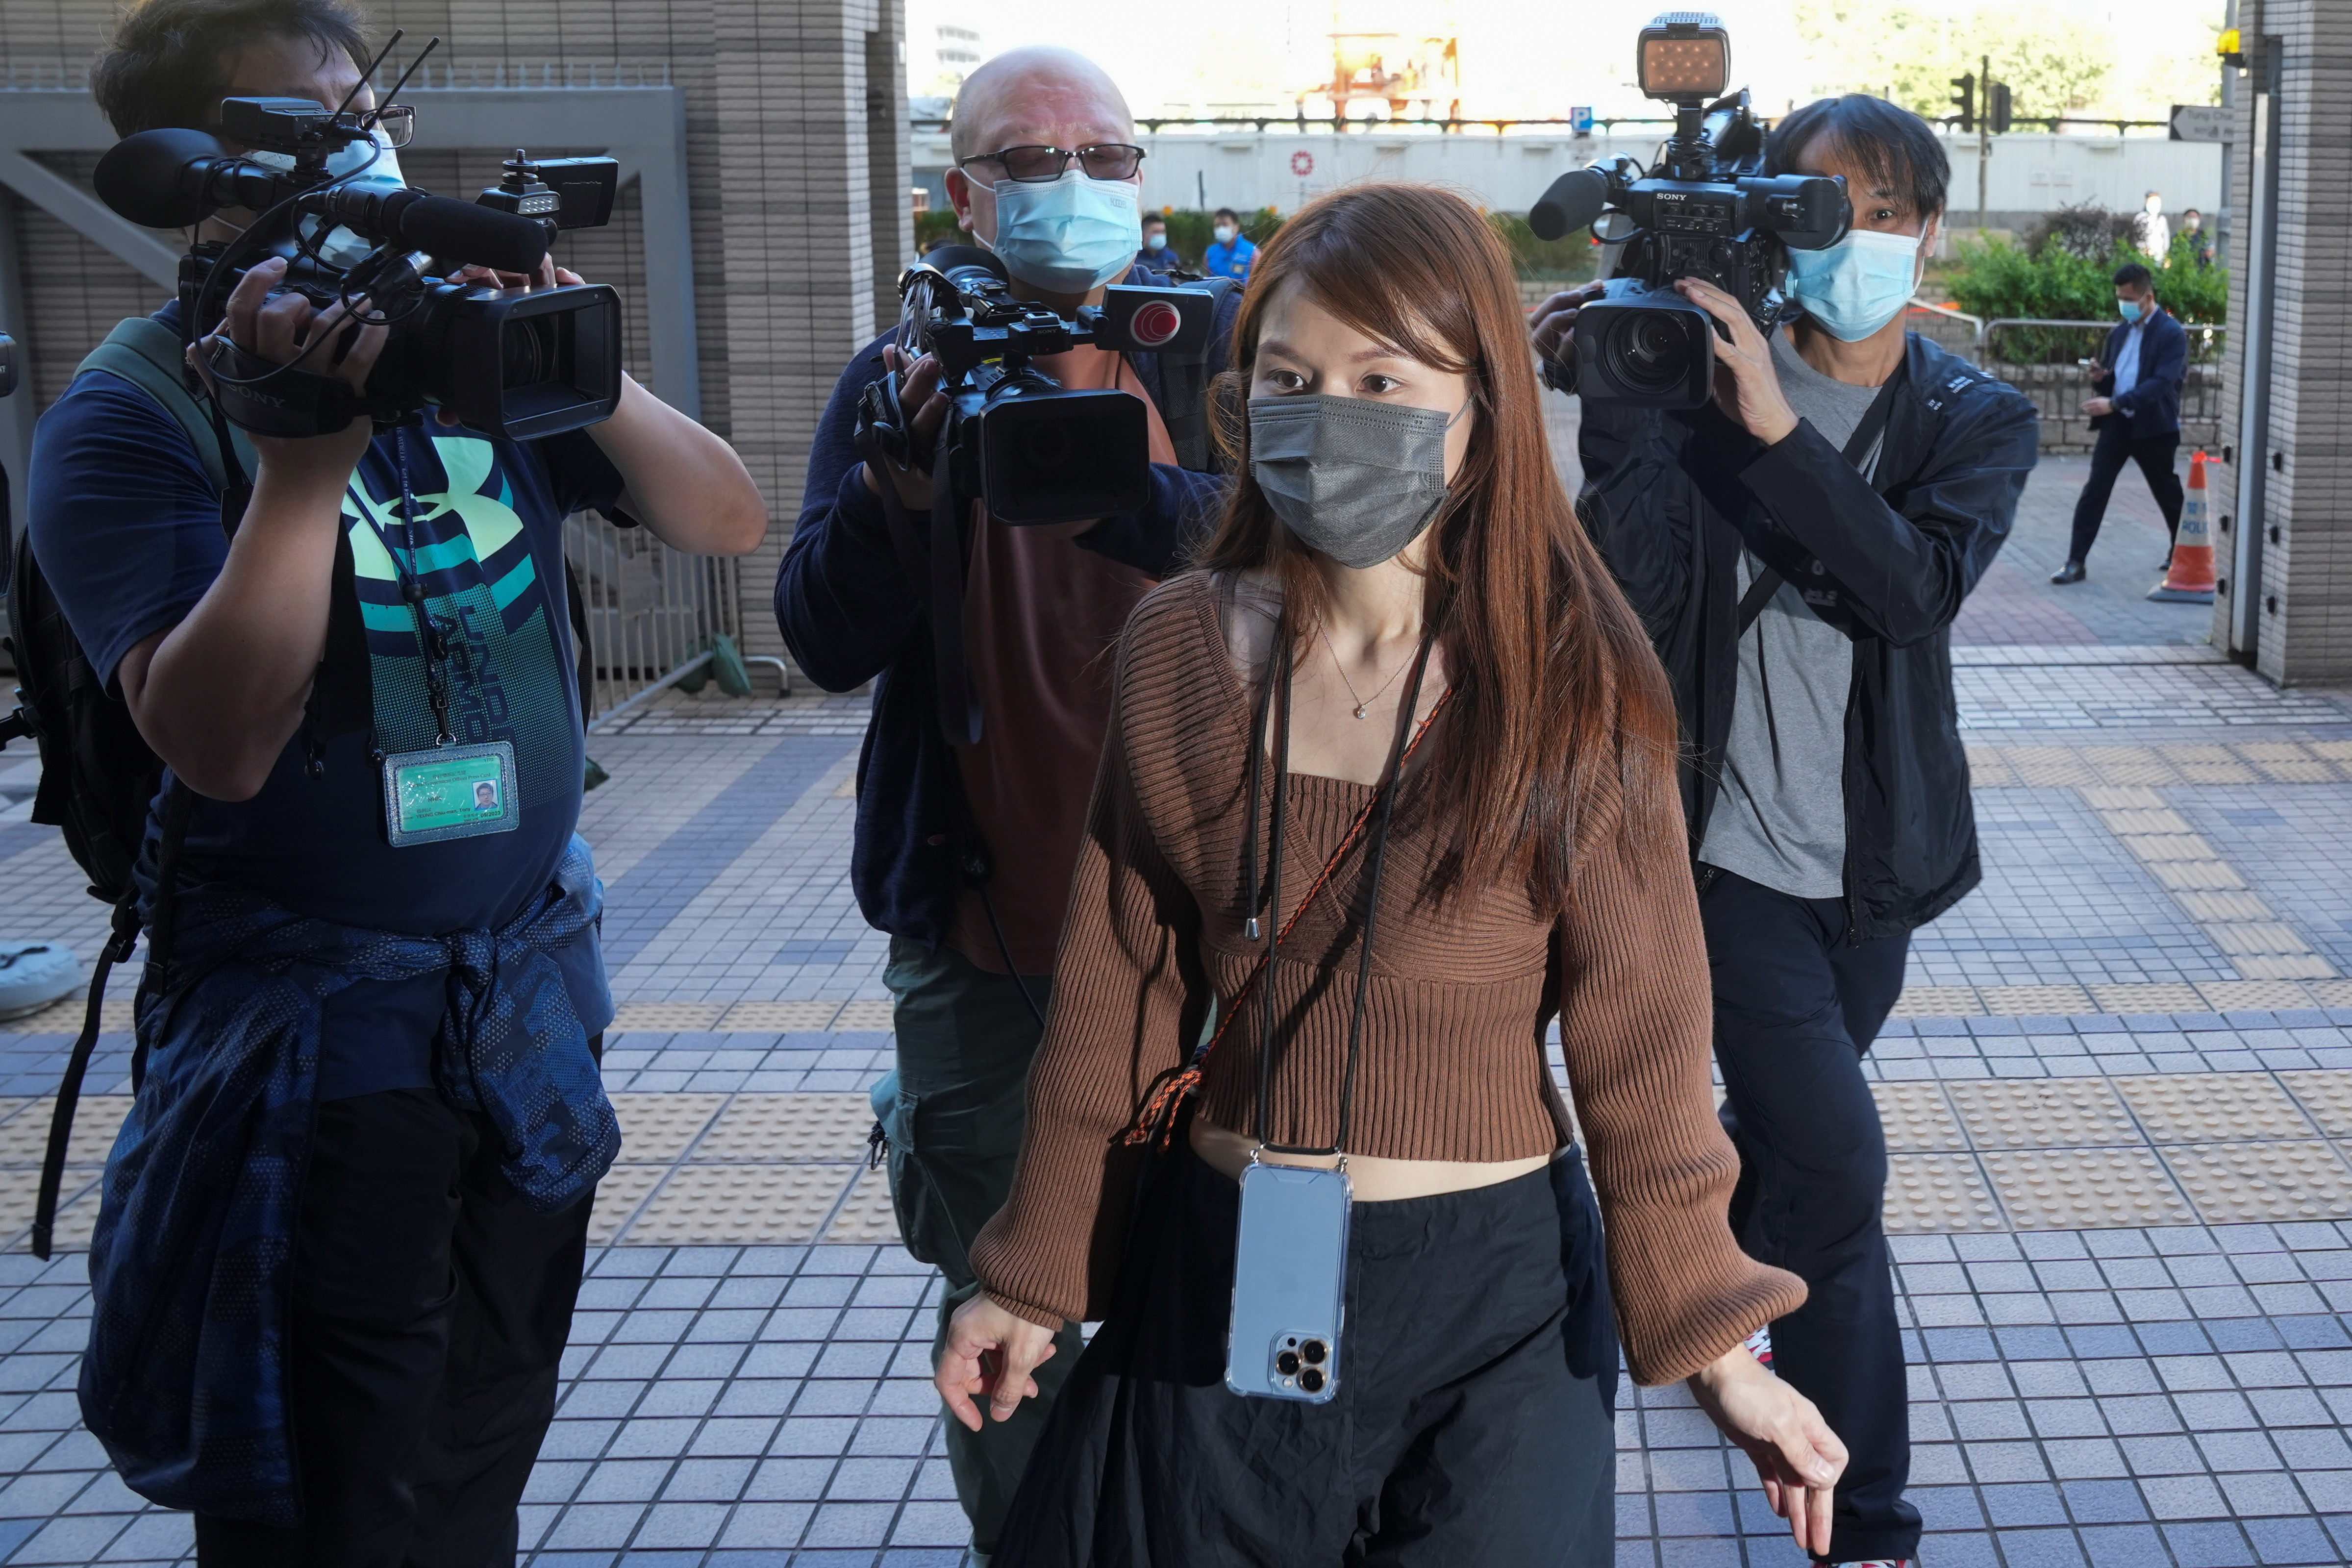 Clarisse Yeung Suet-Ying, one of the 47 pro-democracy activists charged with conspiracy to commit subversion under the national security law, arrives at West Kowloon Magistrates' Courts building, in Hong Kong, China November 29, 2021. REUTERS/Lam Yik